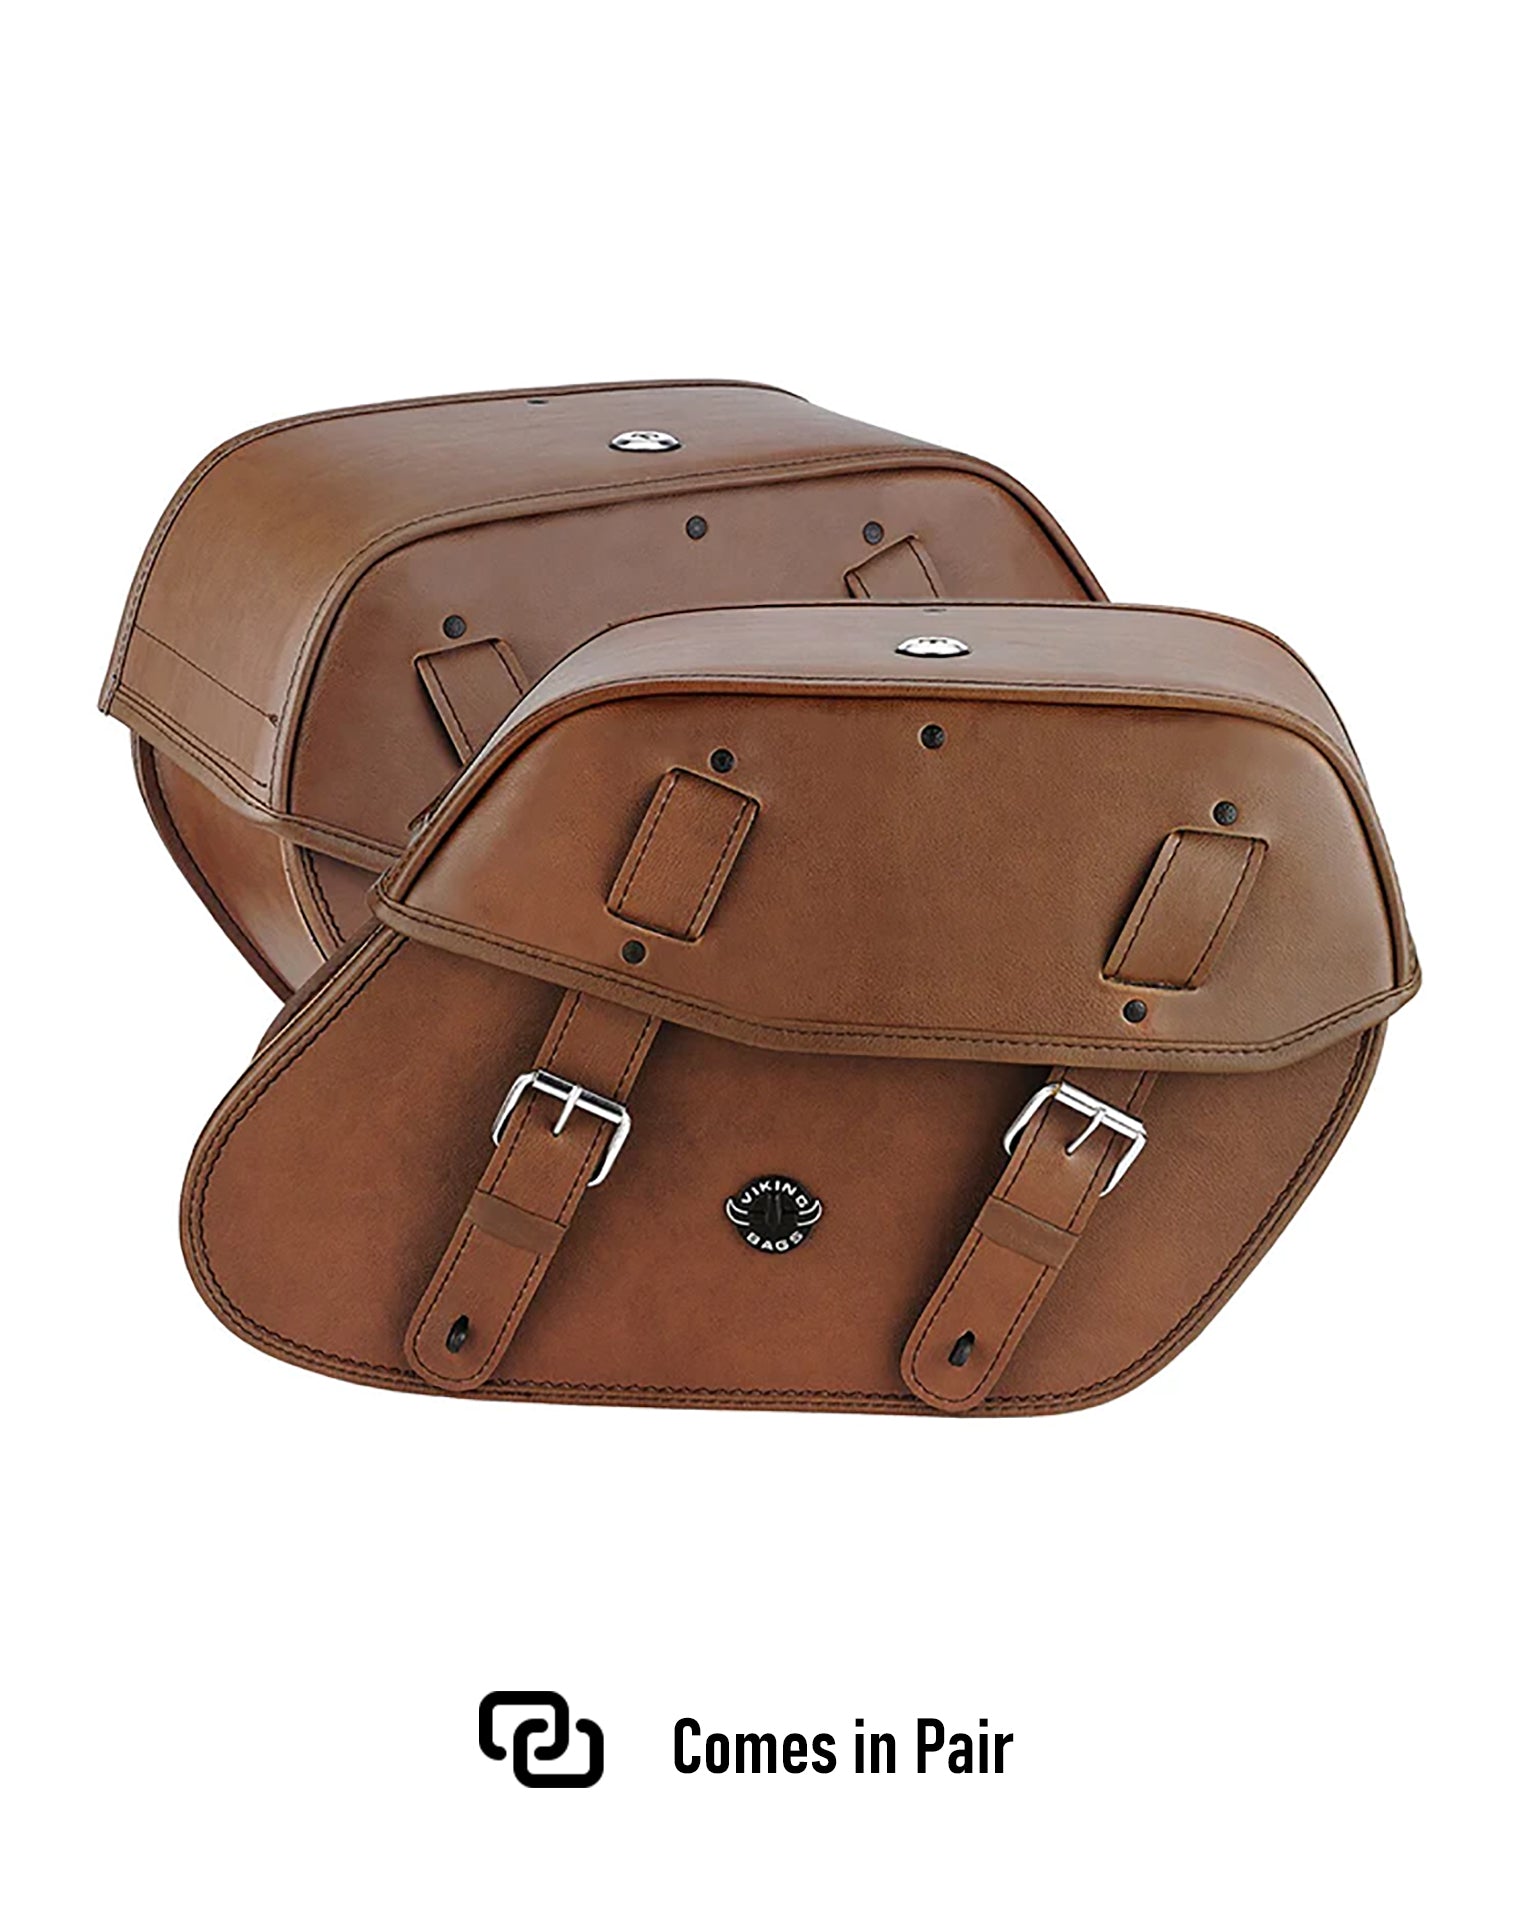 Viking Odin Brown Large Victory 8 Ball Leather Motorcycle Saddlebags Weather Resistant Bags Comes in Pair